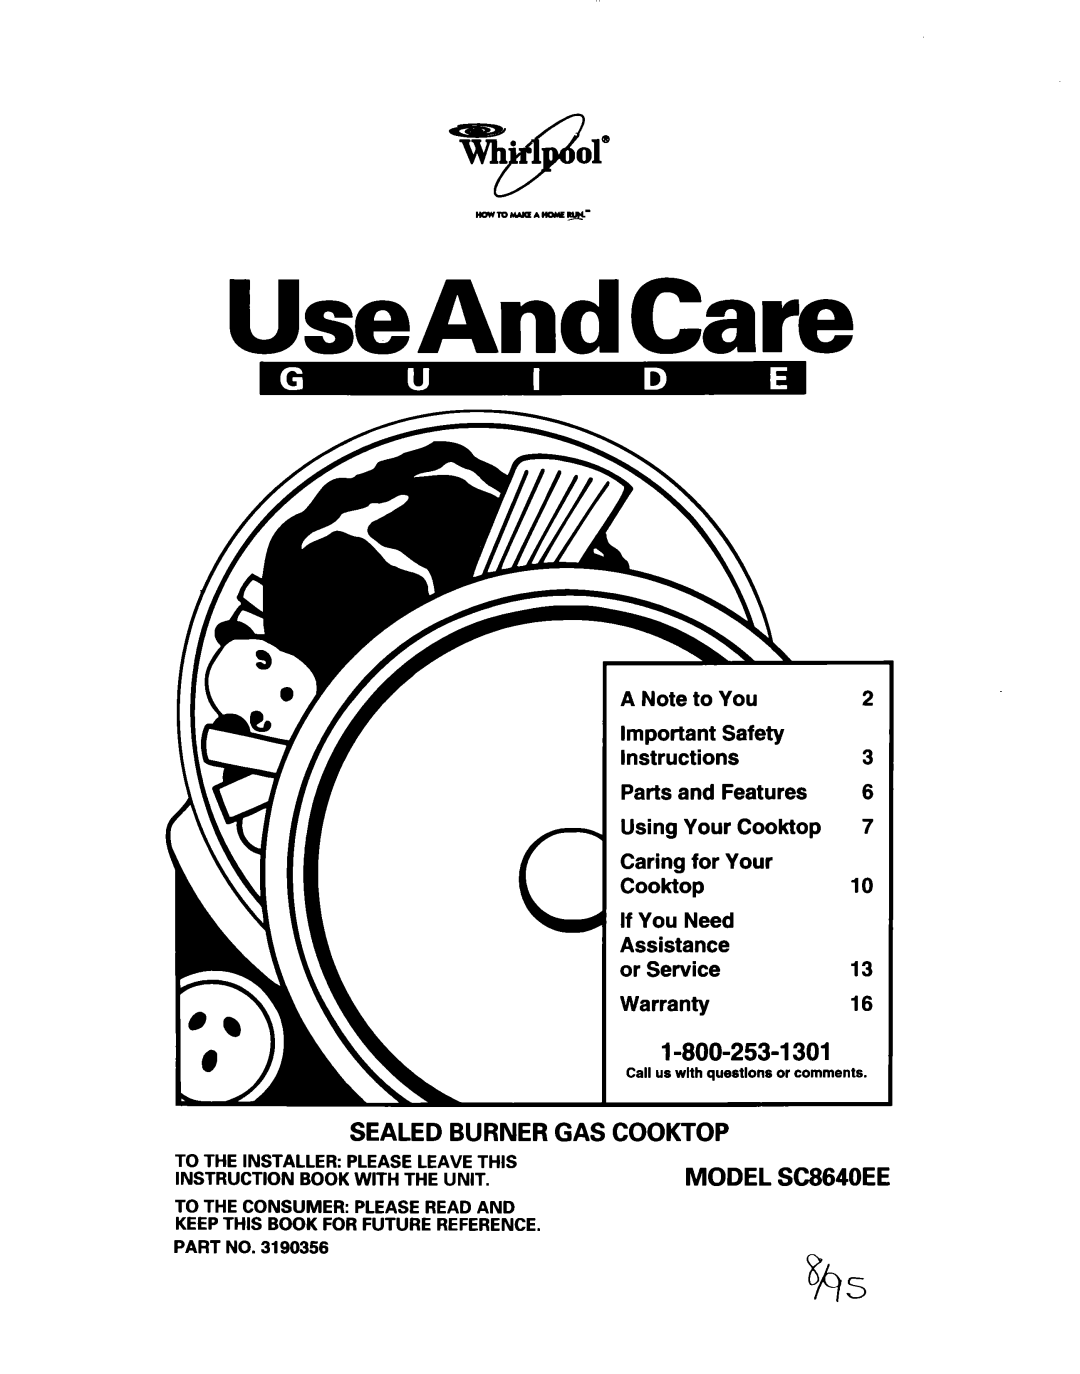 Whirlpool important safety instructions UseAndCare, Sealed Burner Gas Cooktop, MODEL SC6640EE, I-800-253-130 